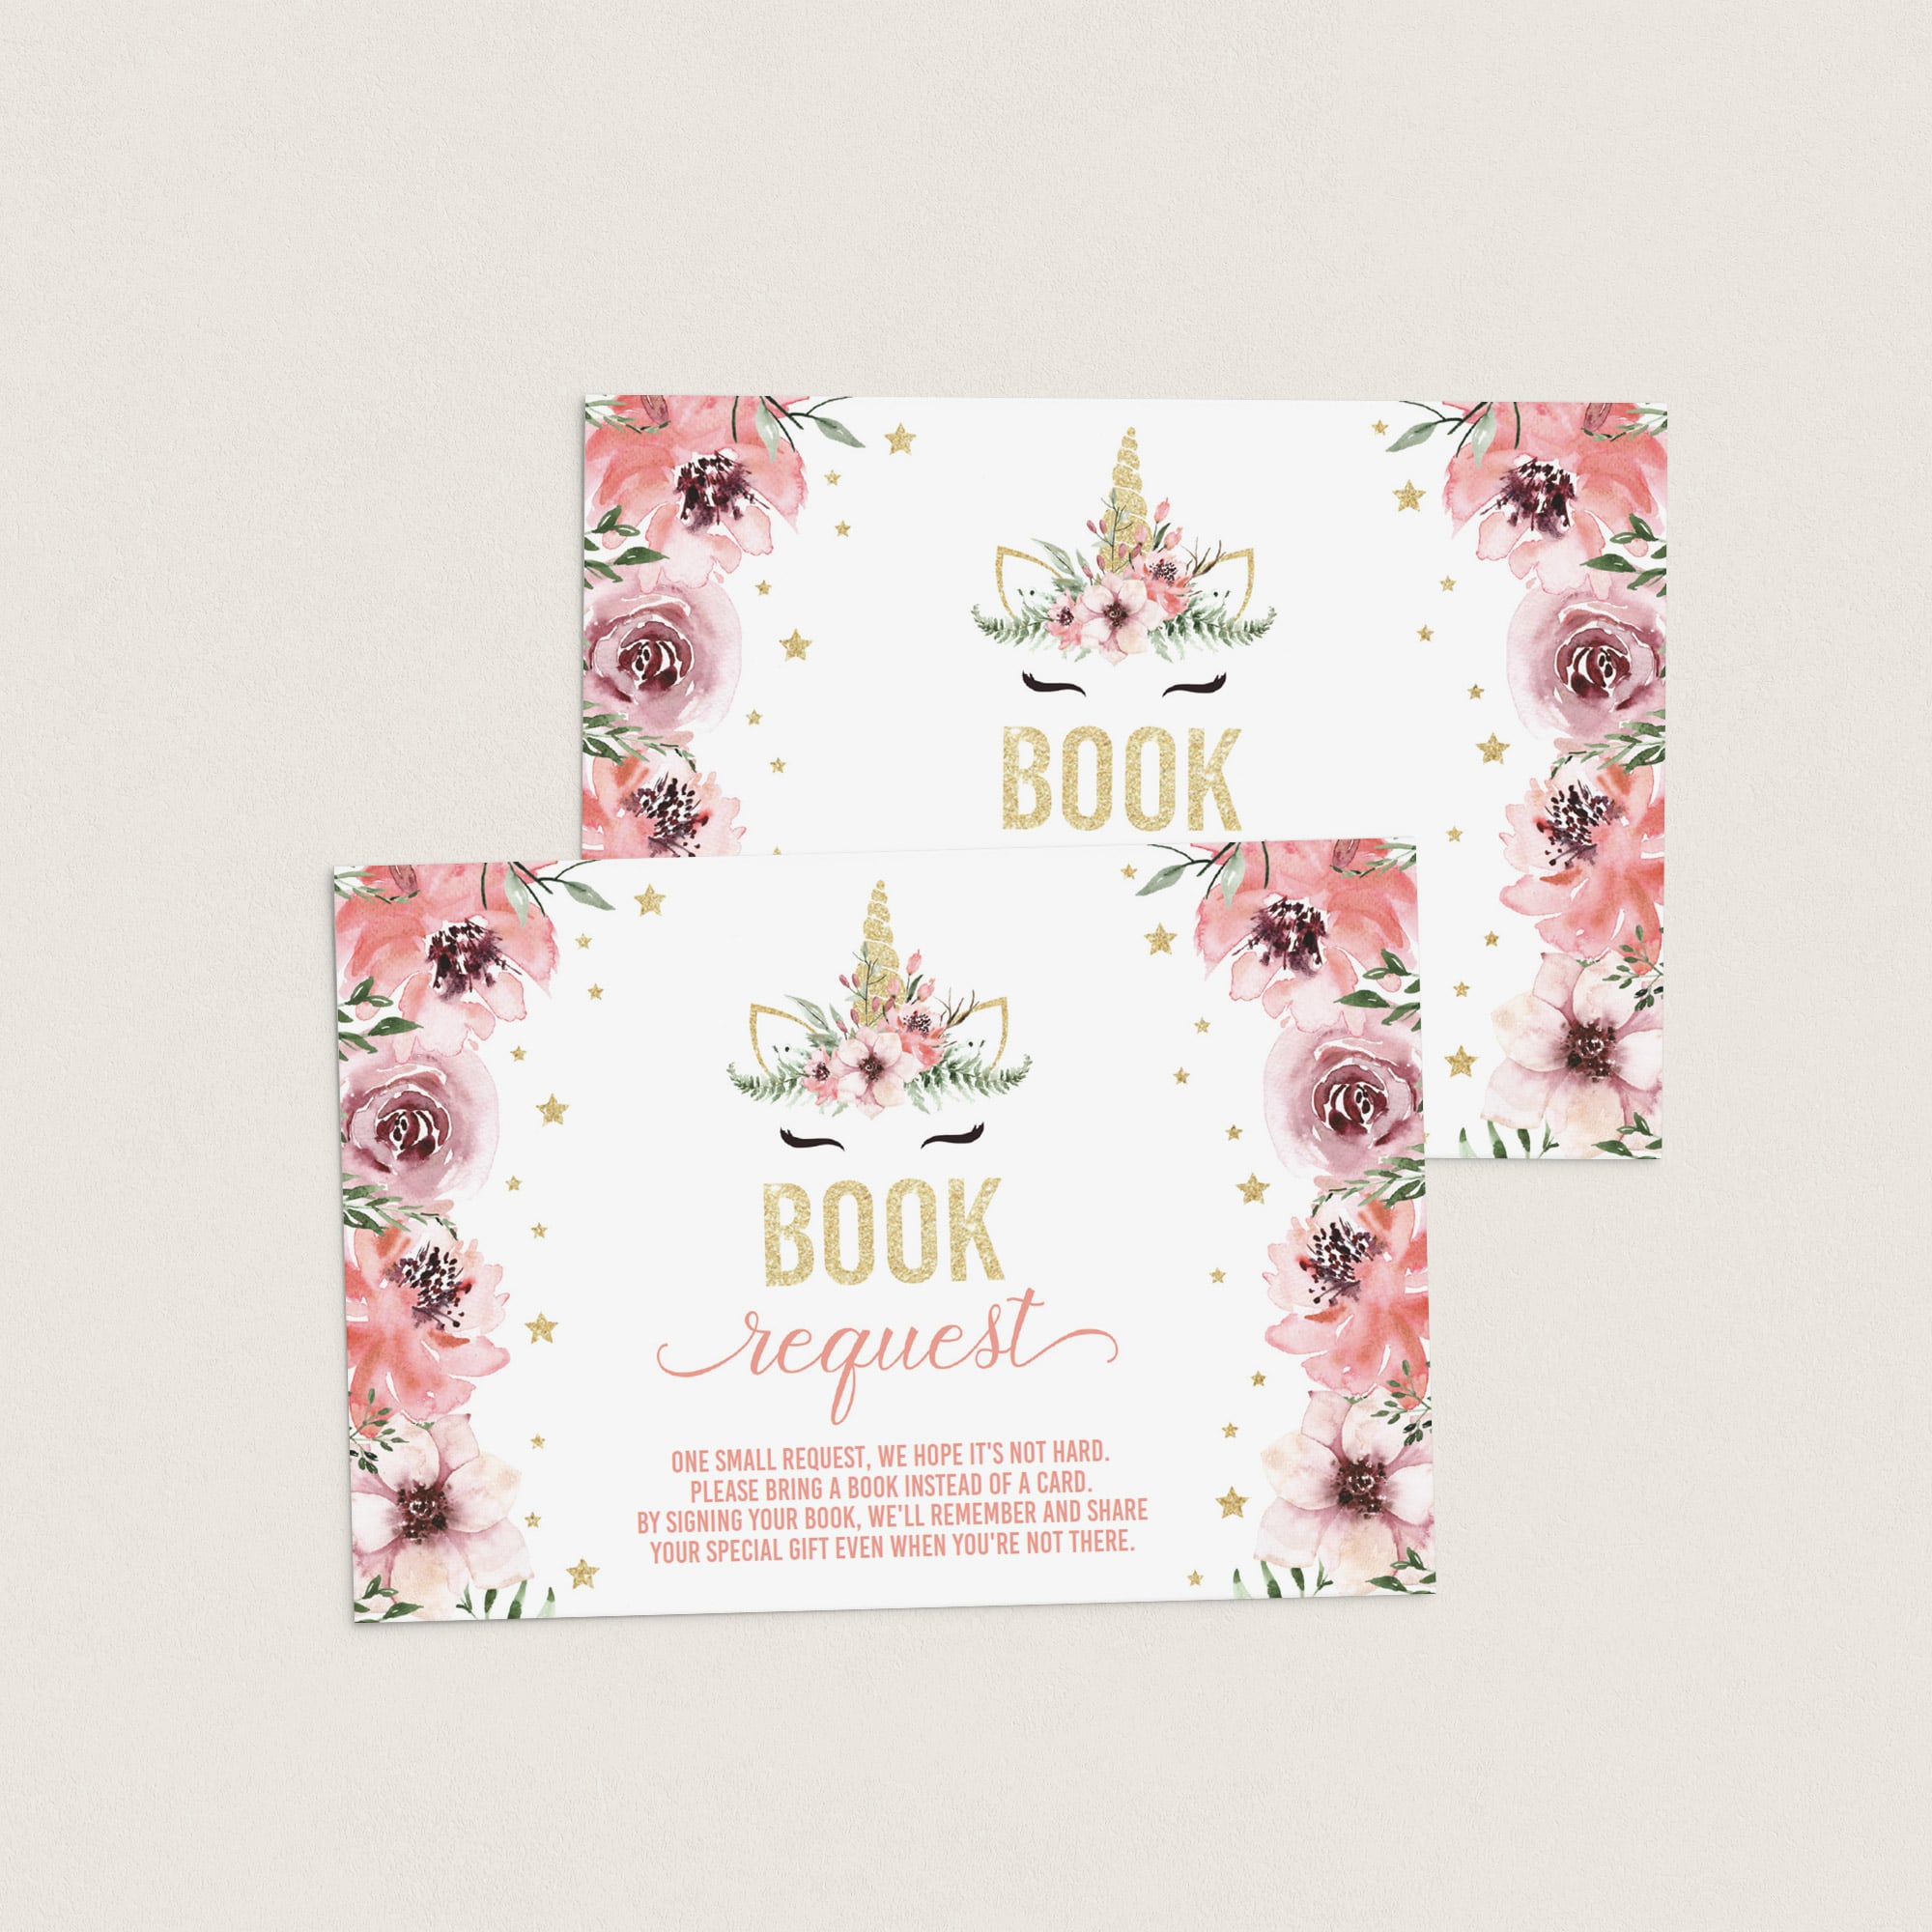 Editable books for baby cards for unicorn themed girl baby shower by LittleSizzle